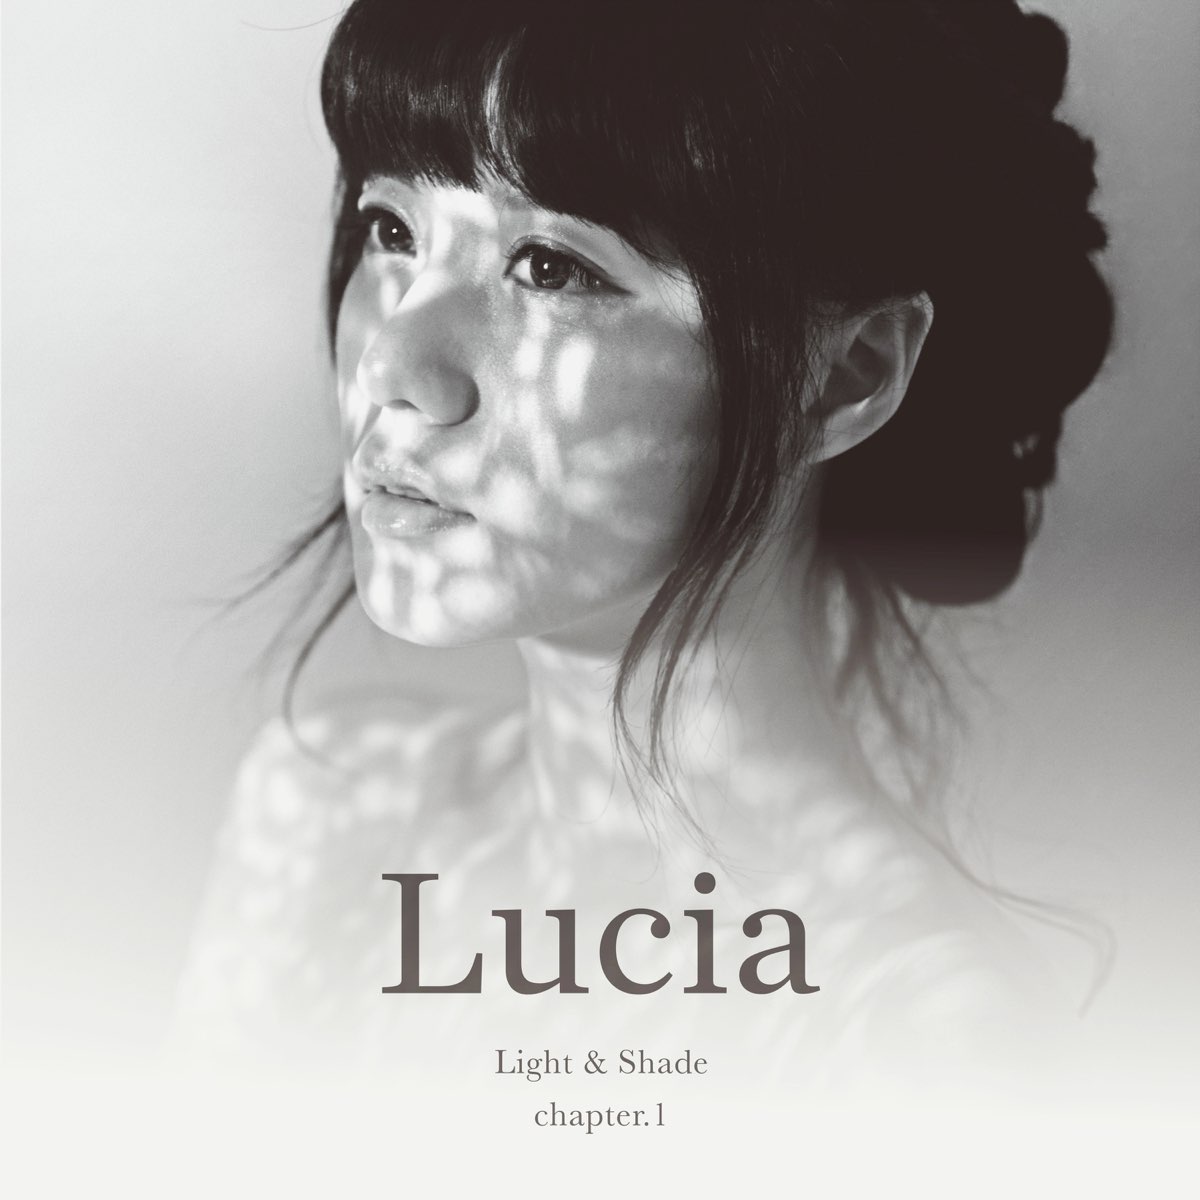 Lucia chapter 1